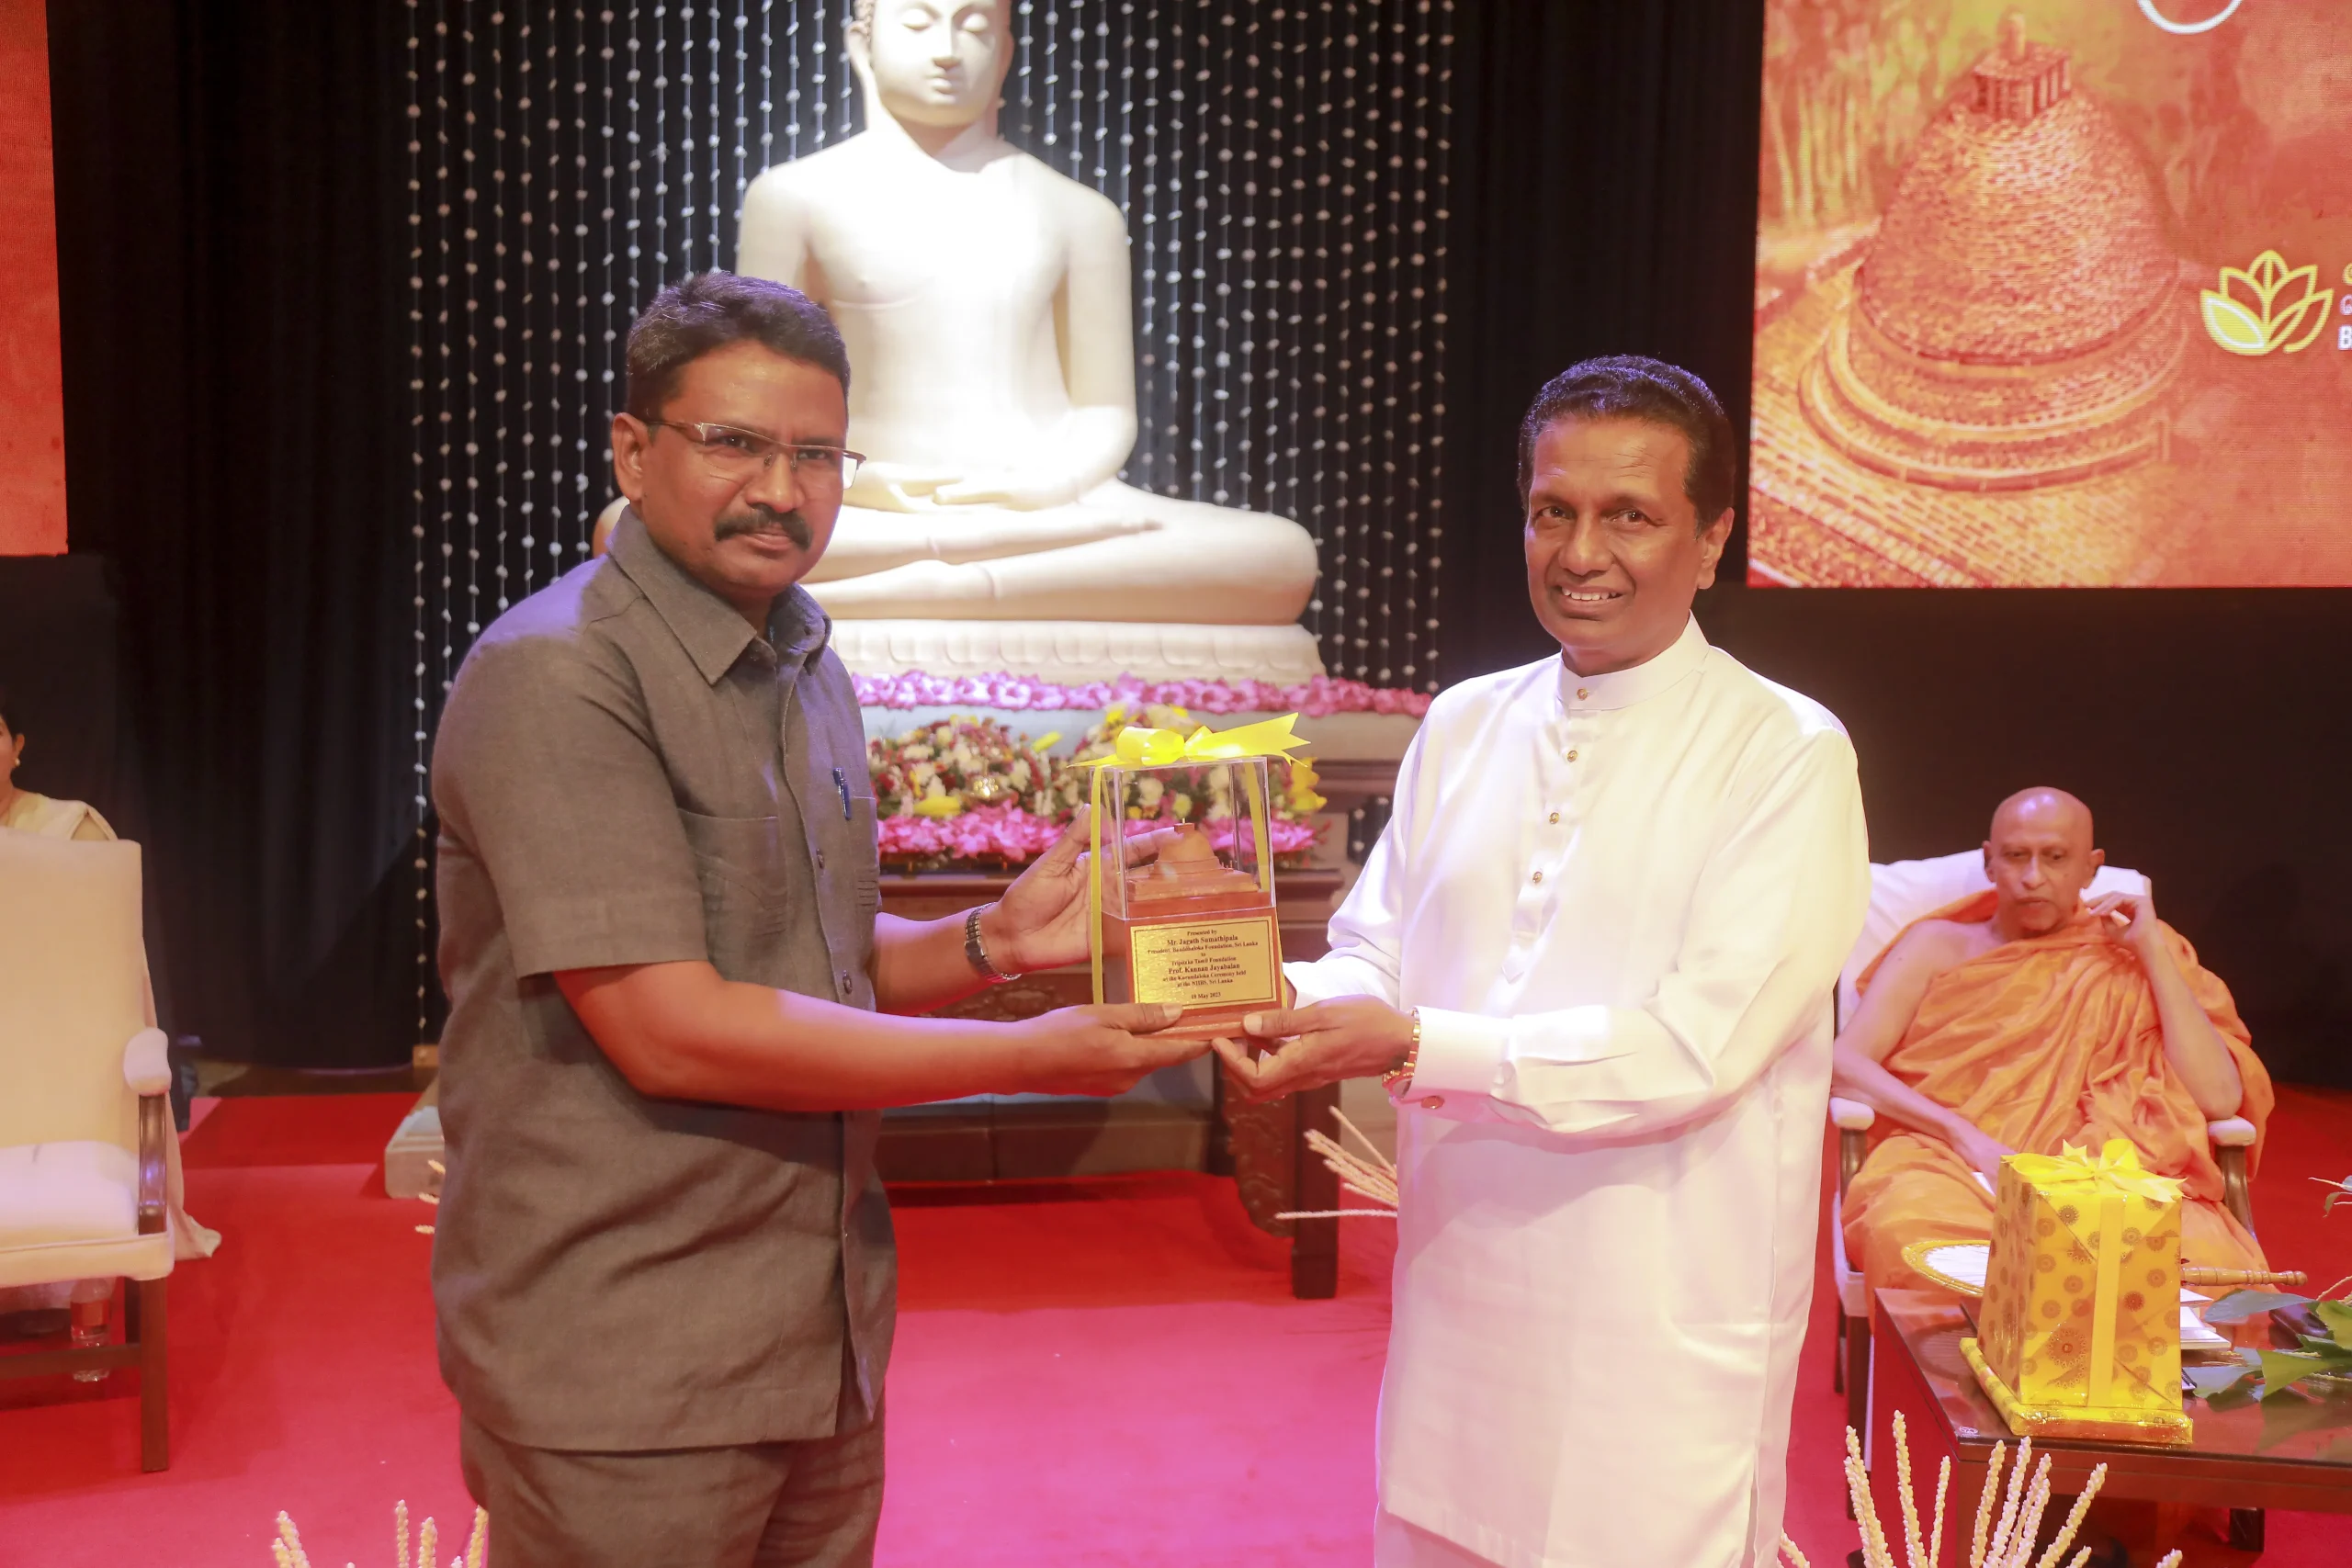 The Baudhaloka Foundation recently organized a remarkable event known as the Ceremony of the Buddhist Heritage of Kurundi